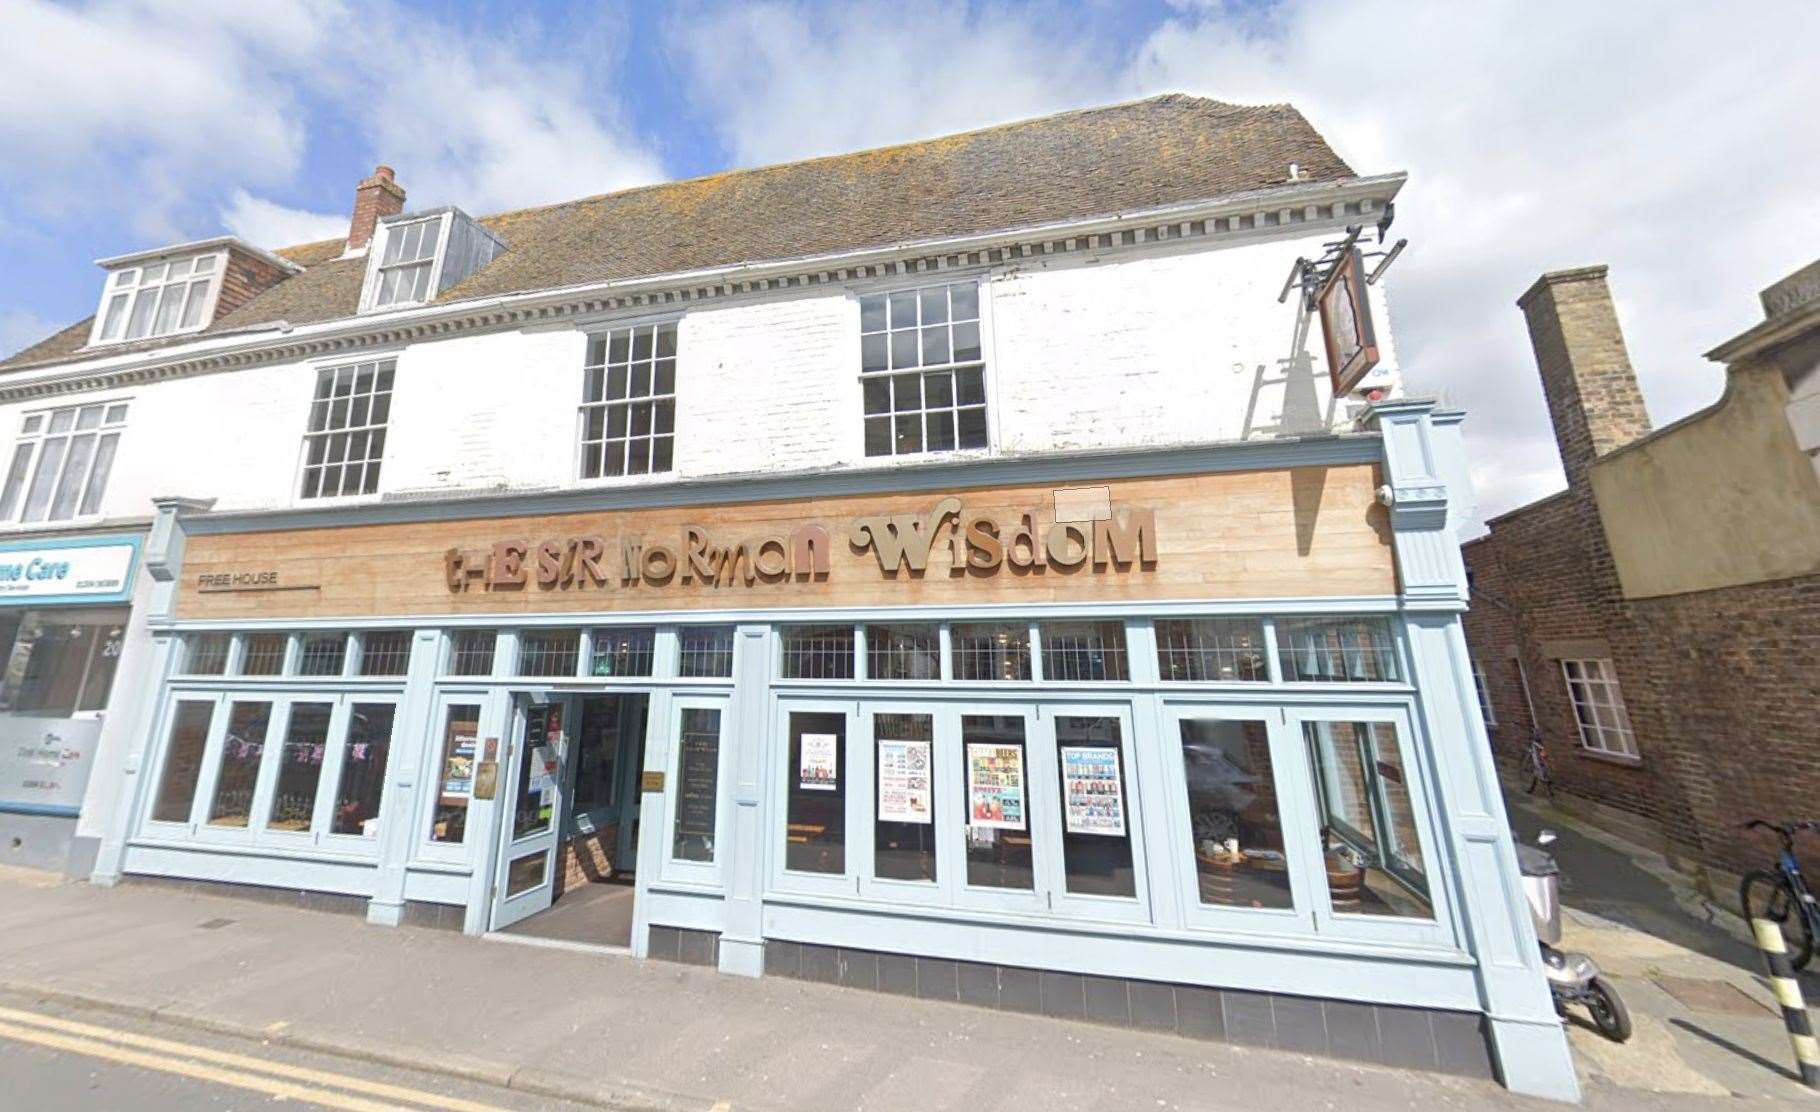 Armed police were called to the Sir Norman Wisdom Wetherspoon on Queen Street in Deal. Photo: Google Maps